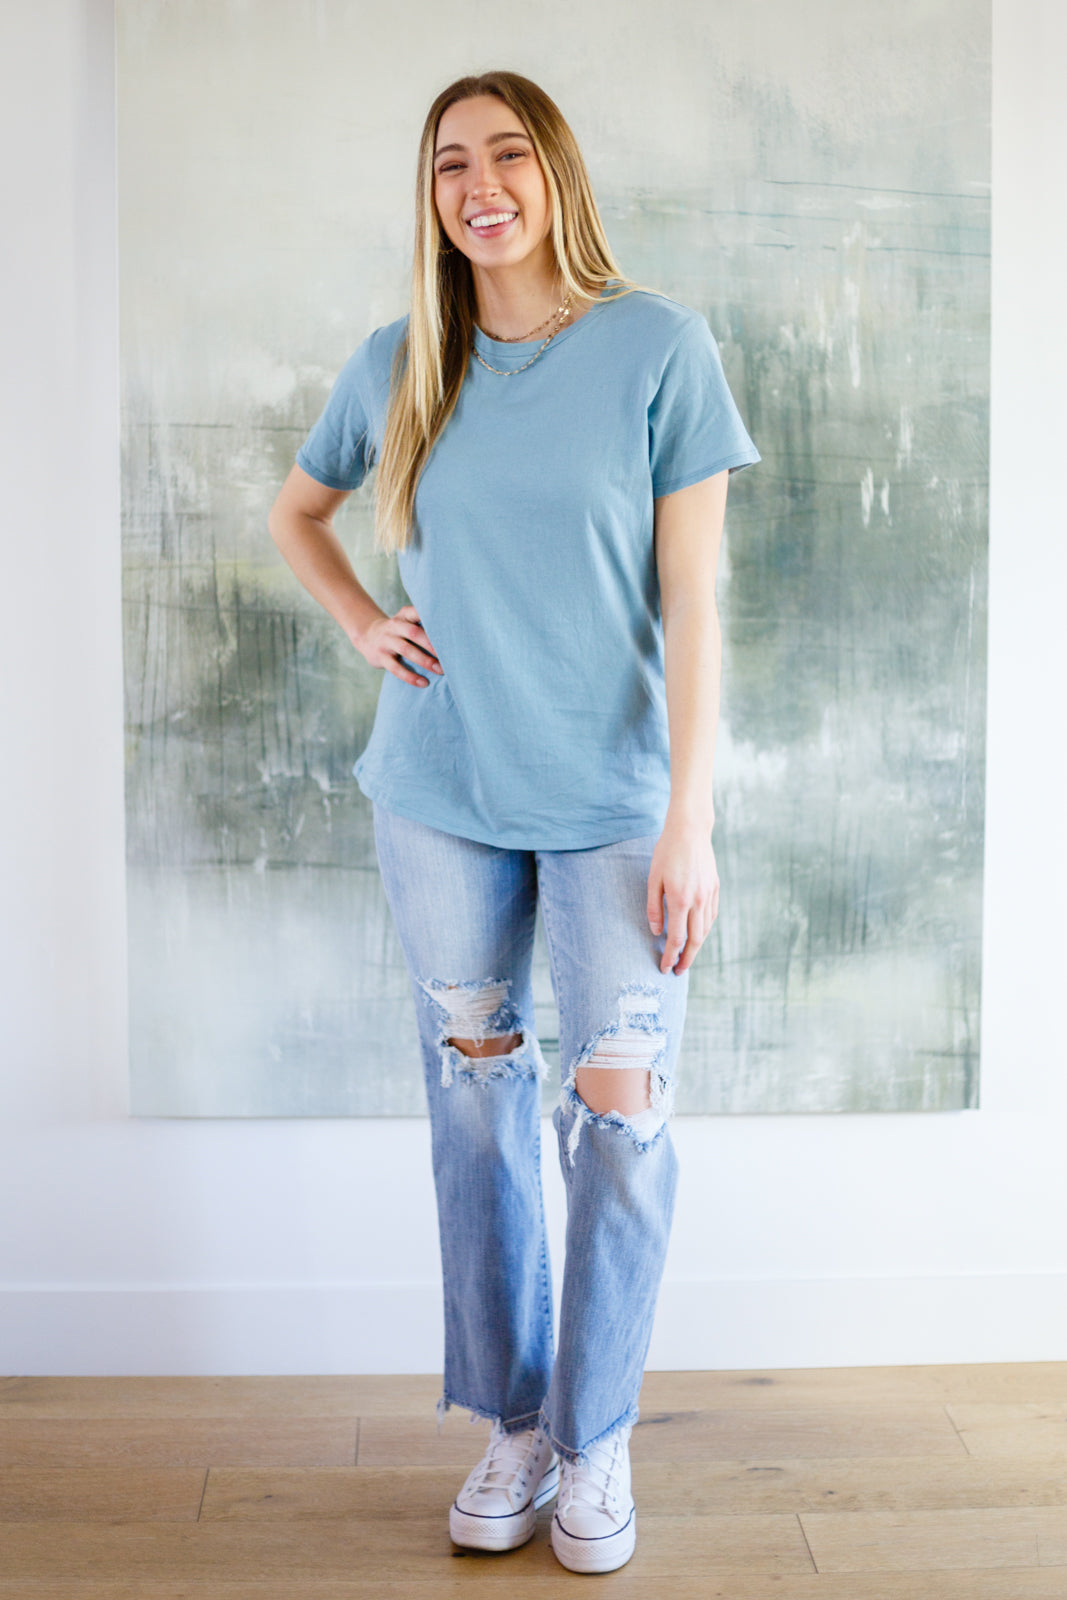 Cardinal Short Sleeve Tee in Blue Grey-Tops-Inspired by Justeen-Women's Clothing Boutique in Chicago, Illinois